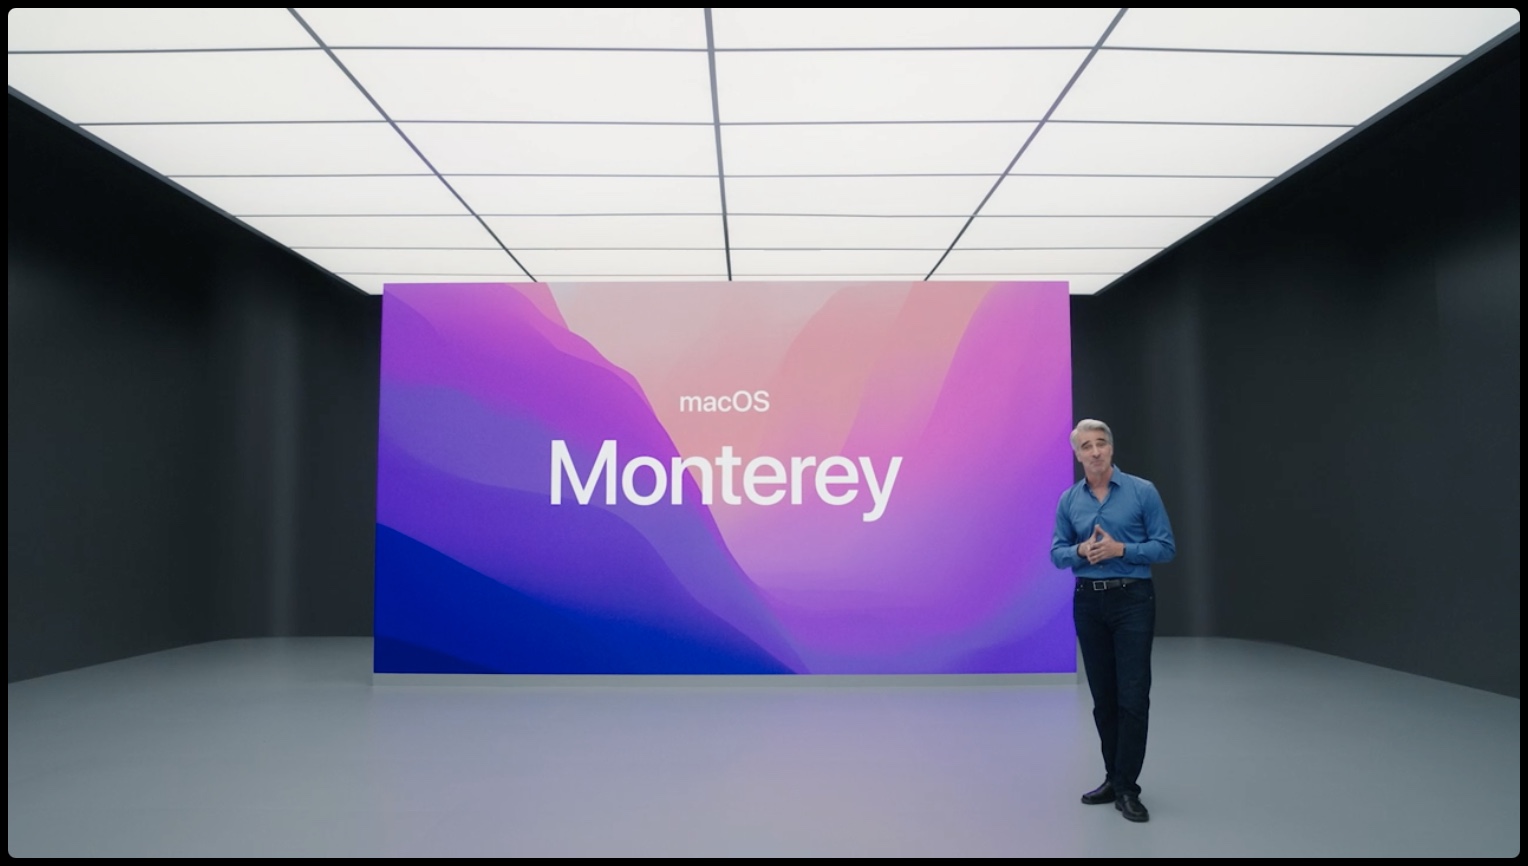 A still from Apple's presentation with Craig Federighi standing in front of a slide with the text "macOS Monterey"